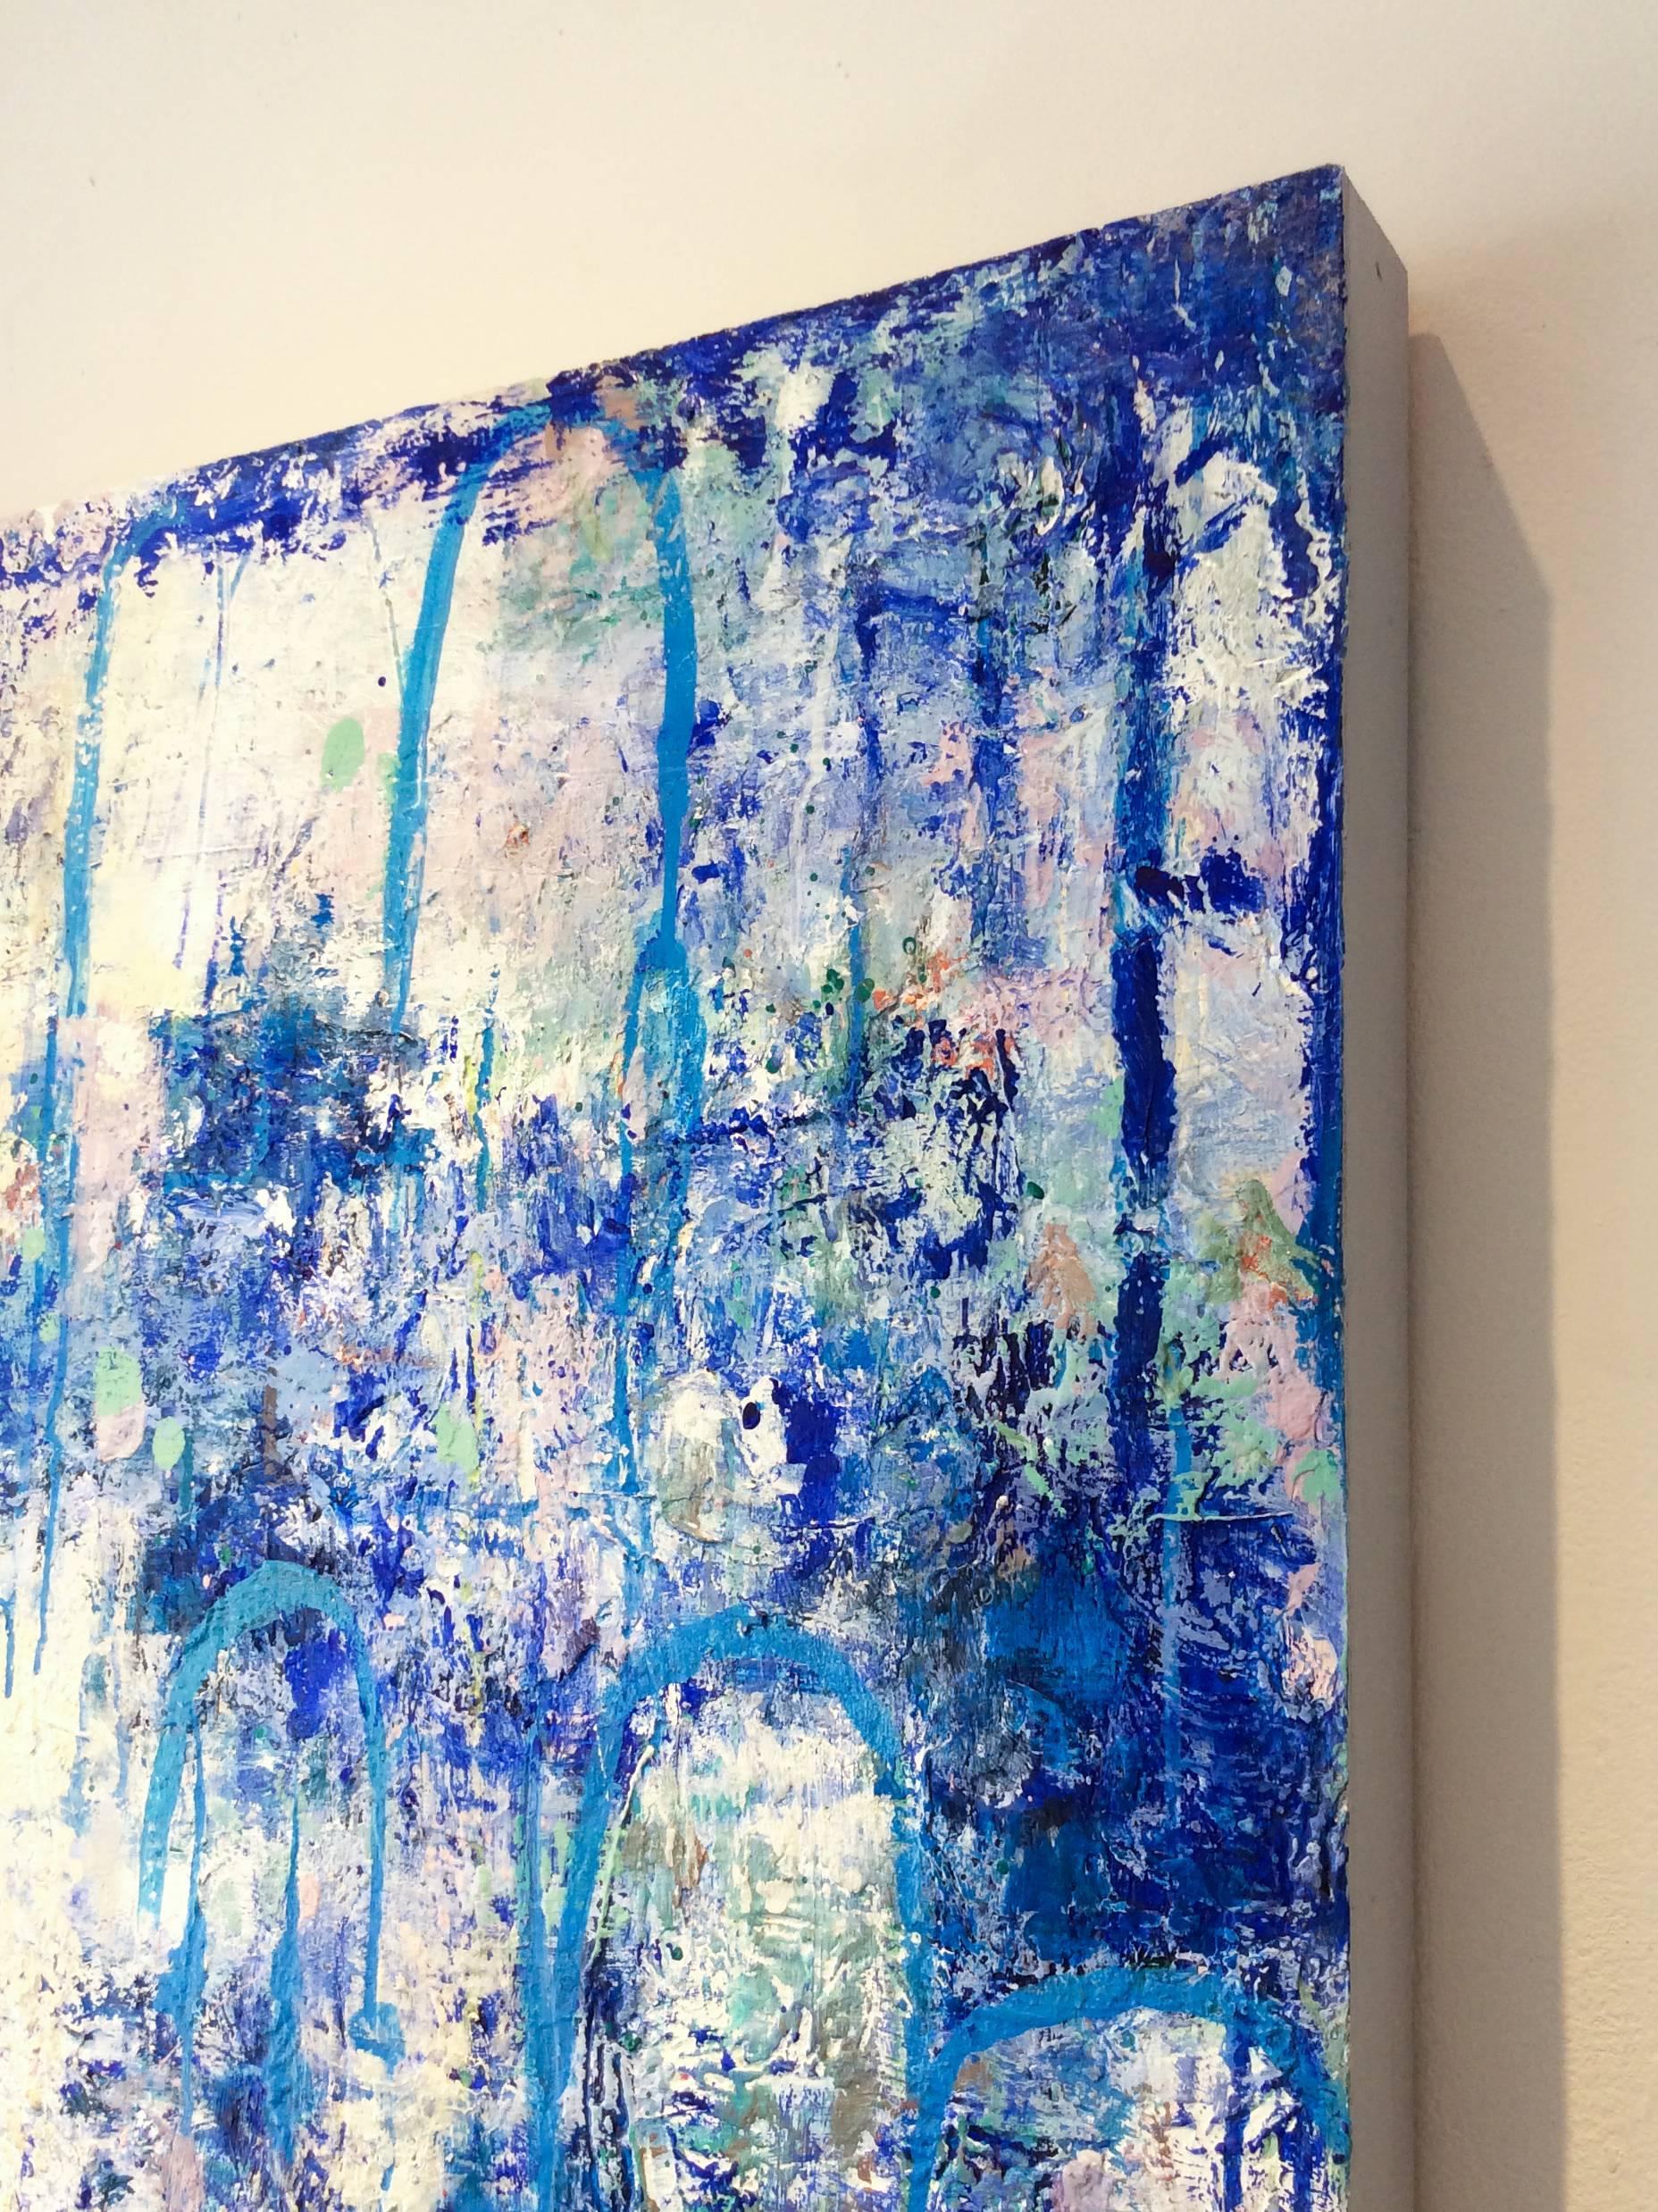 Hydrology (Contemporary Vertical Abstract Expressionist Painting, Blue & White) For Sale 2